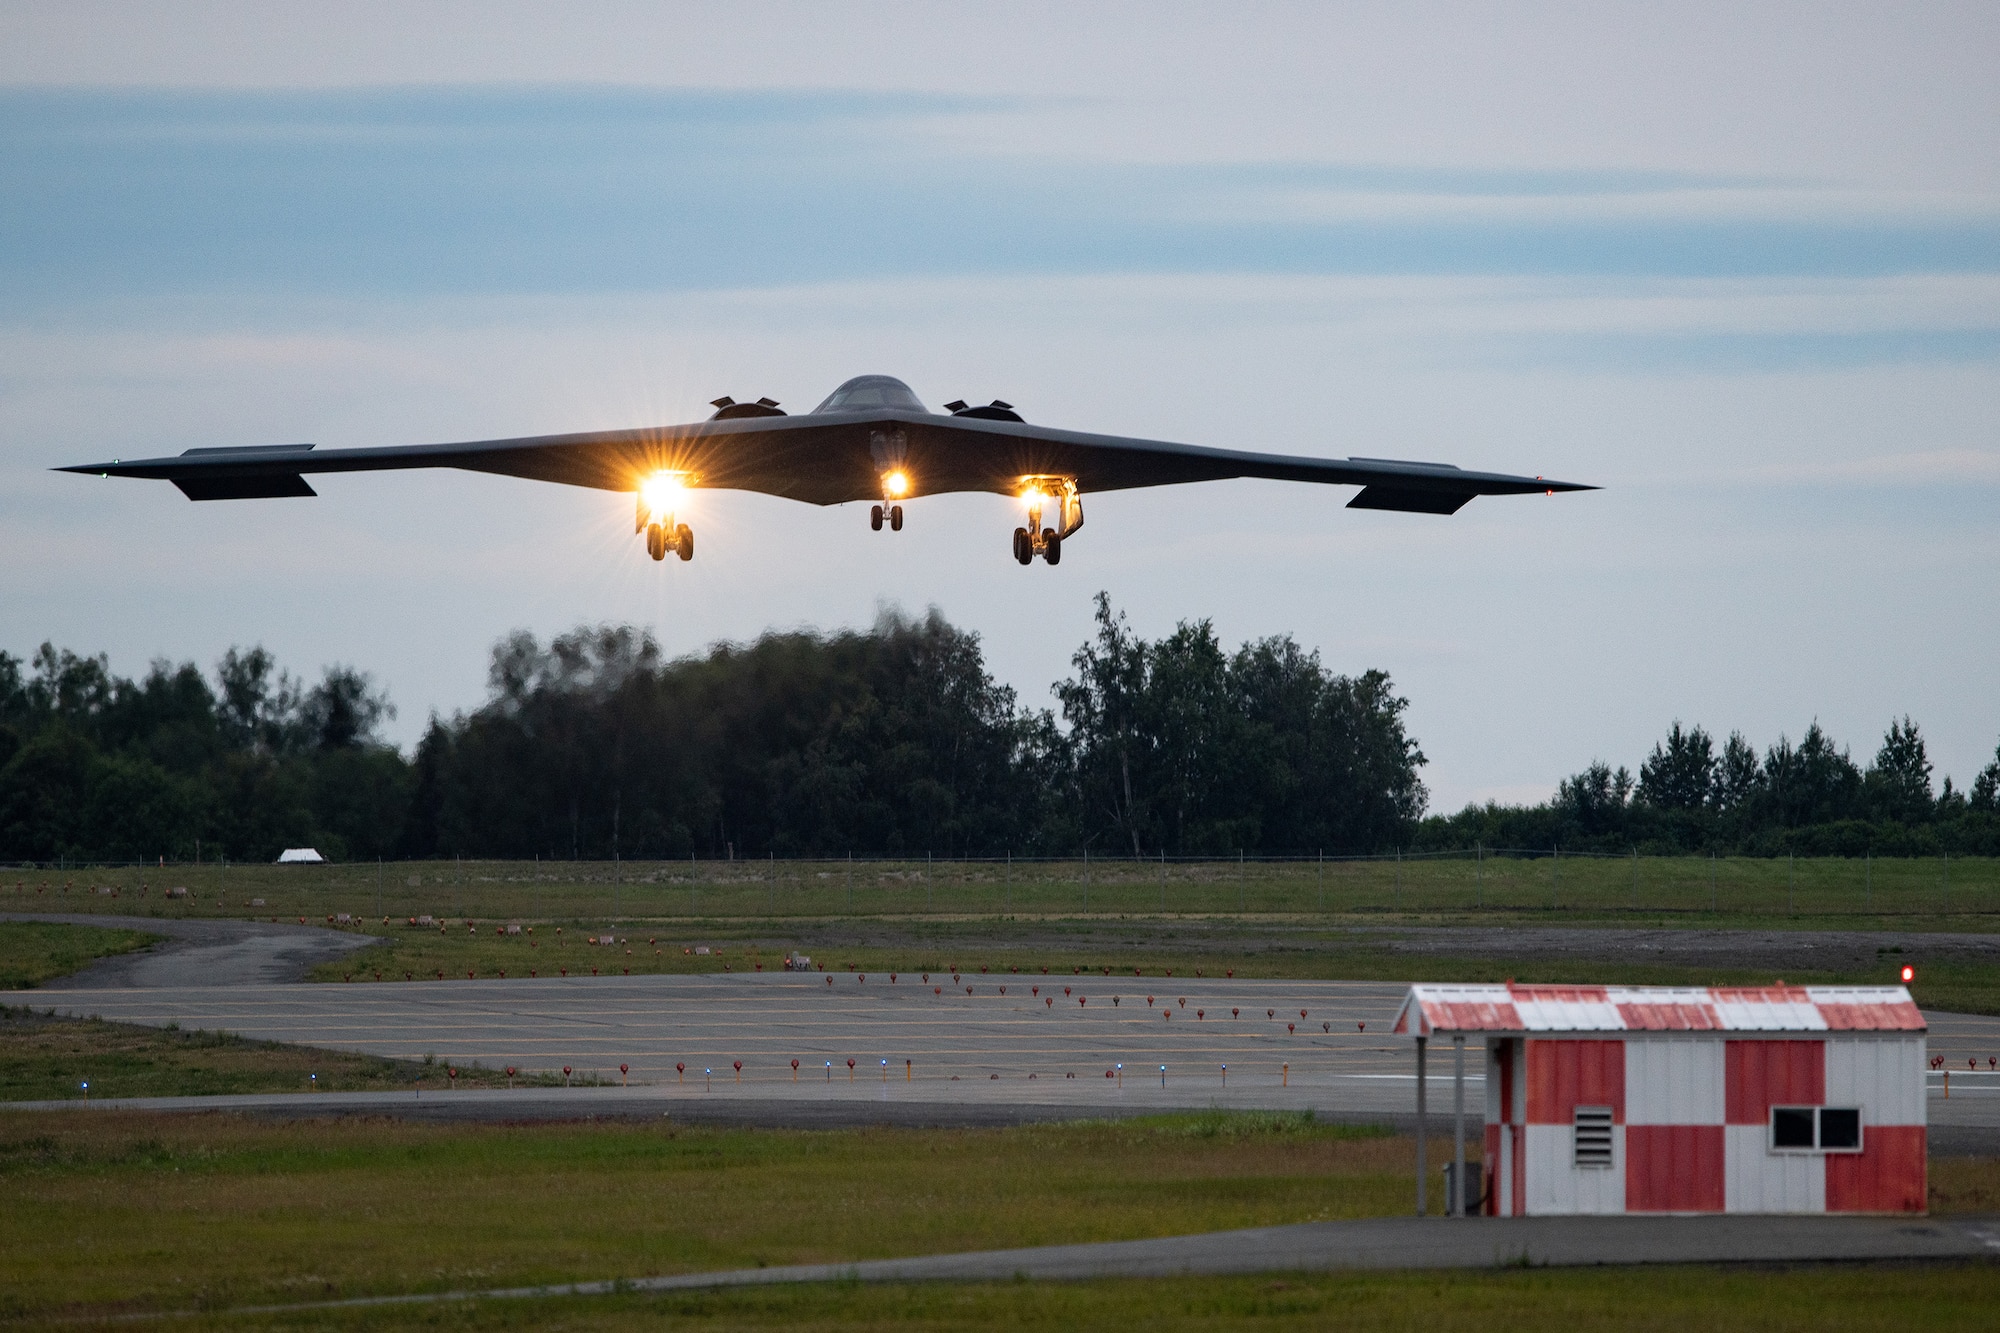 Delivering assurance: tri-bombers sync efforts in Alaska frontier